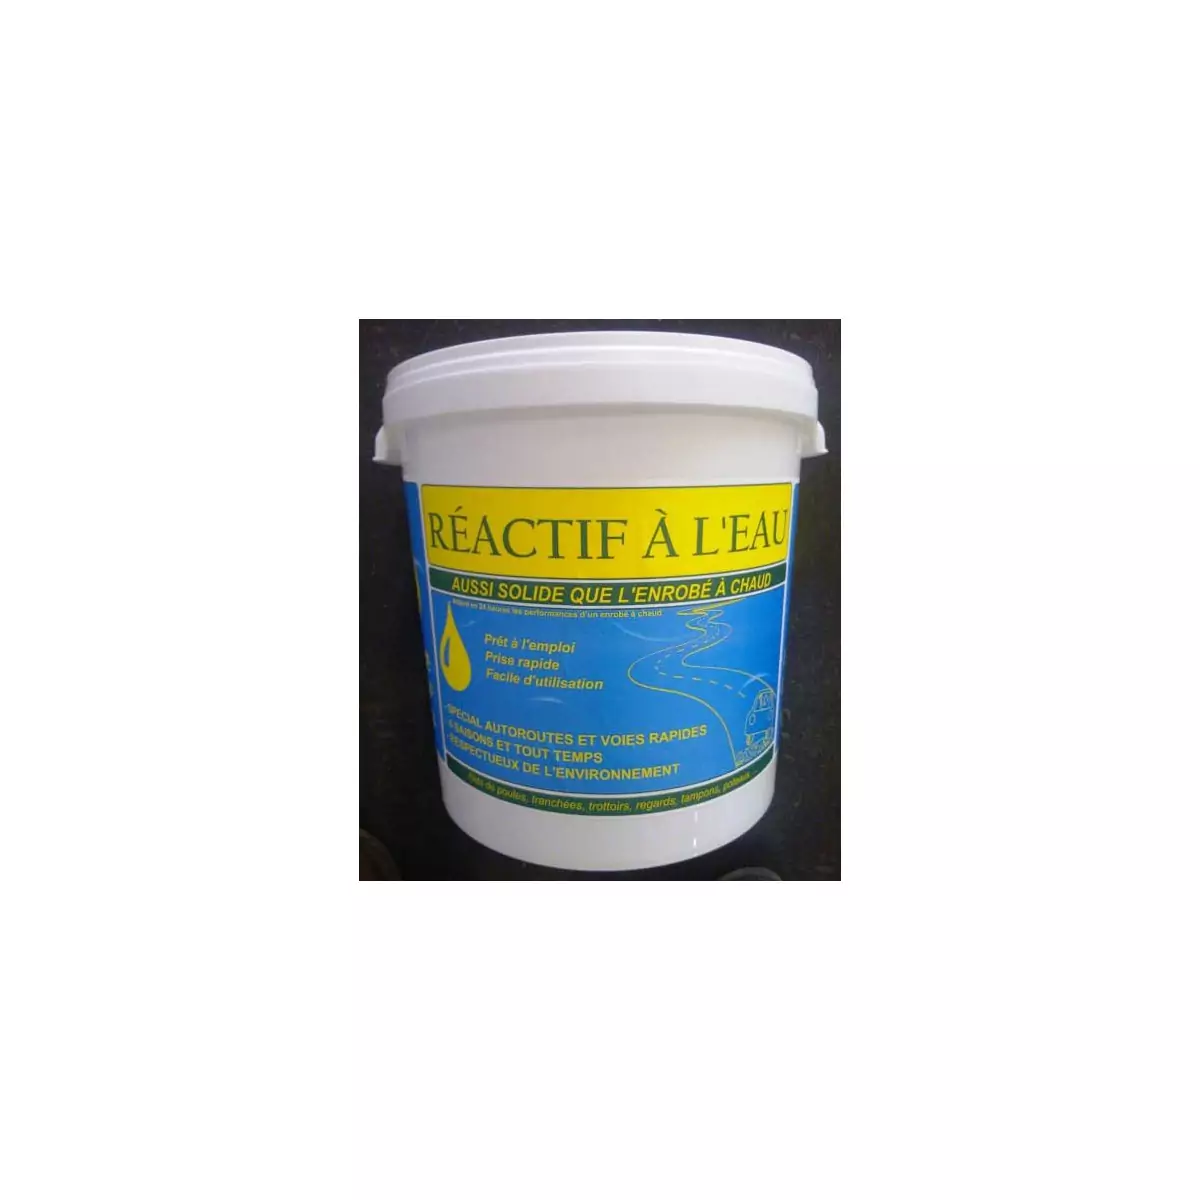 Cold coated high performance water reactive bucket of 25 kgs